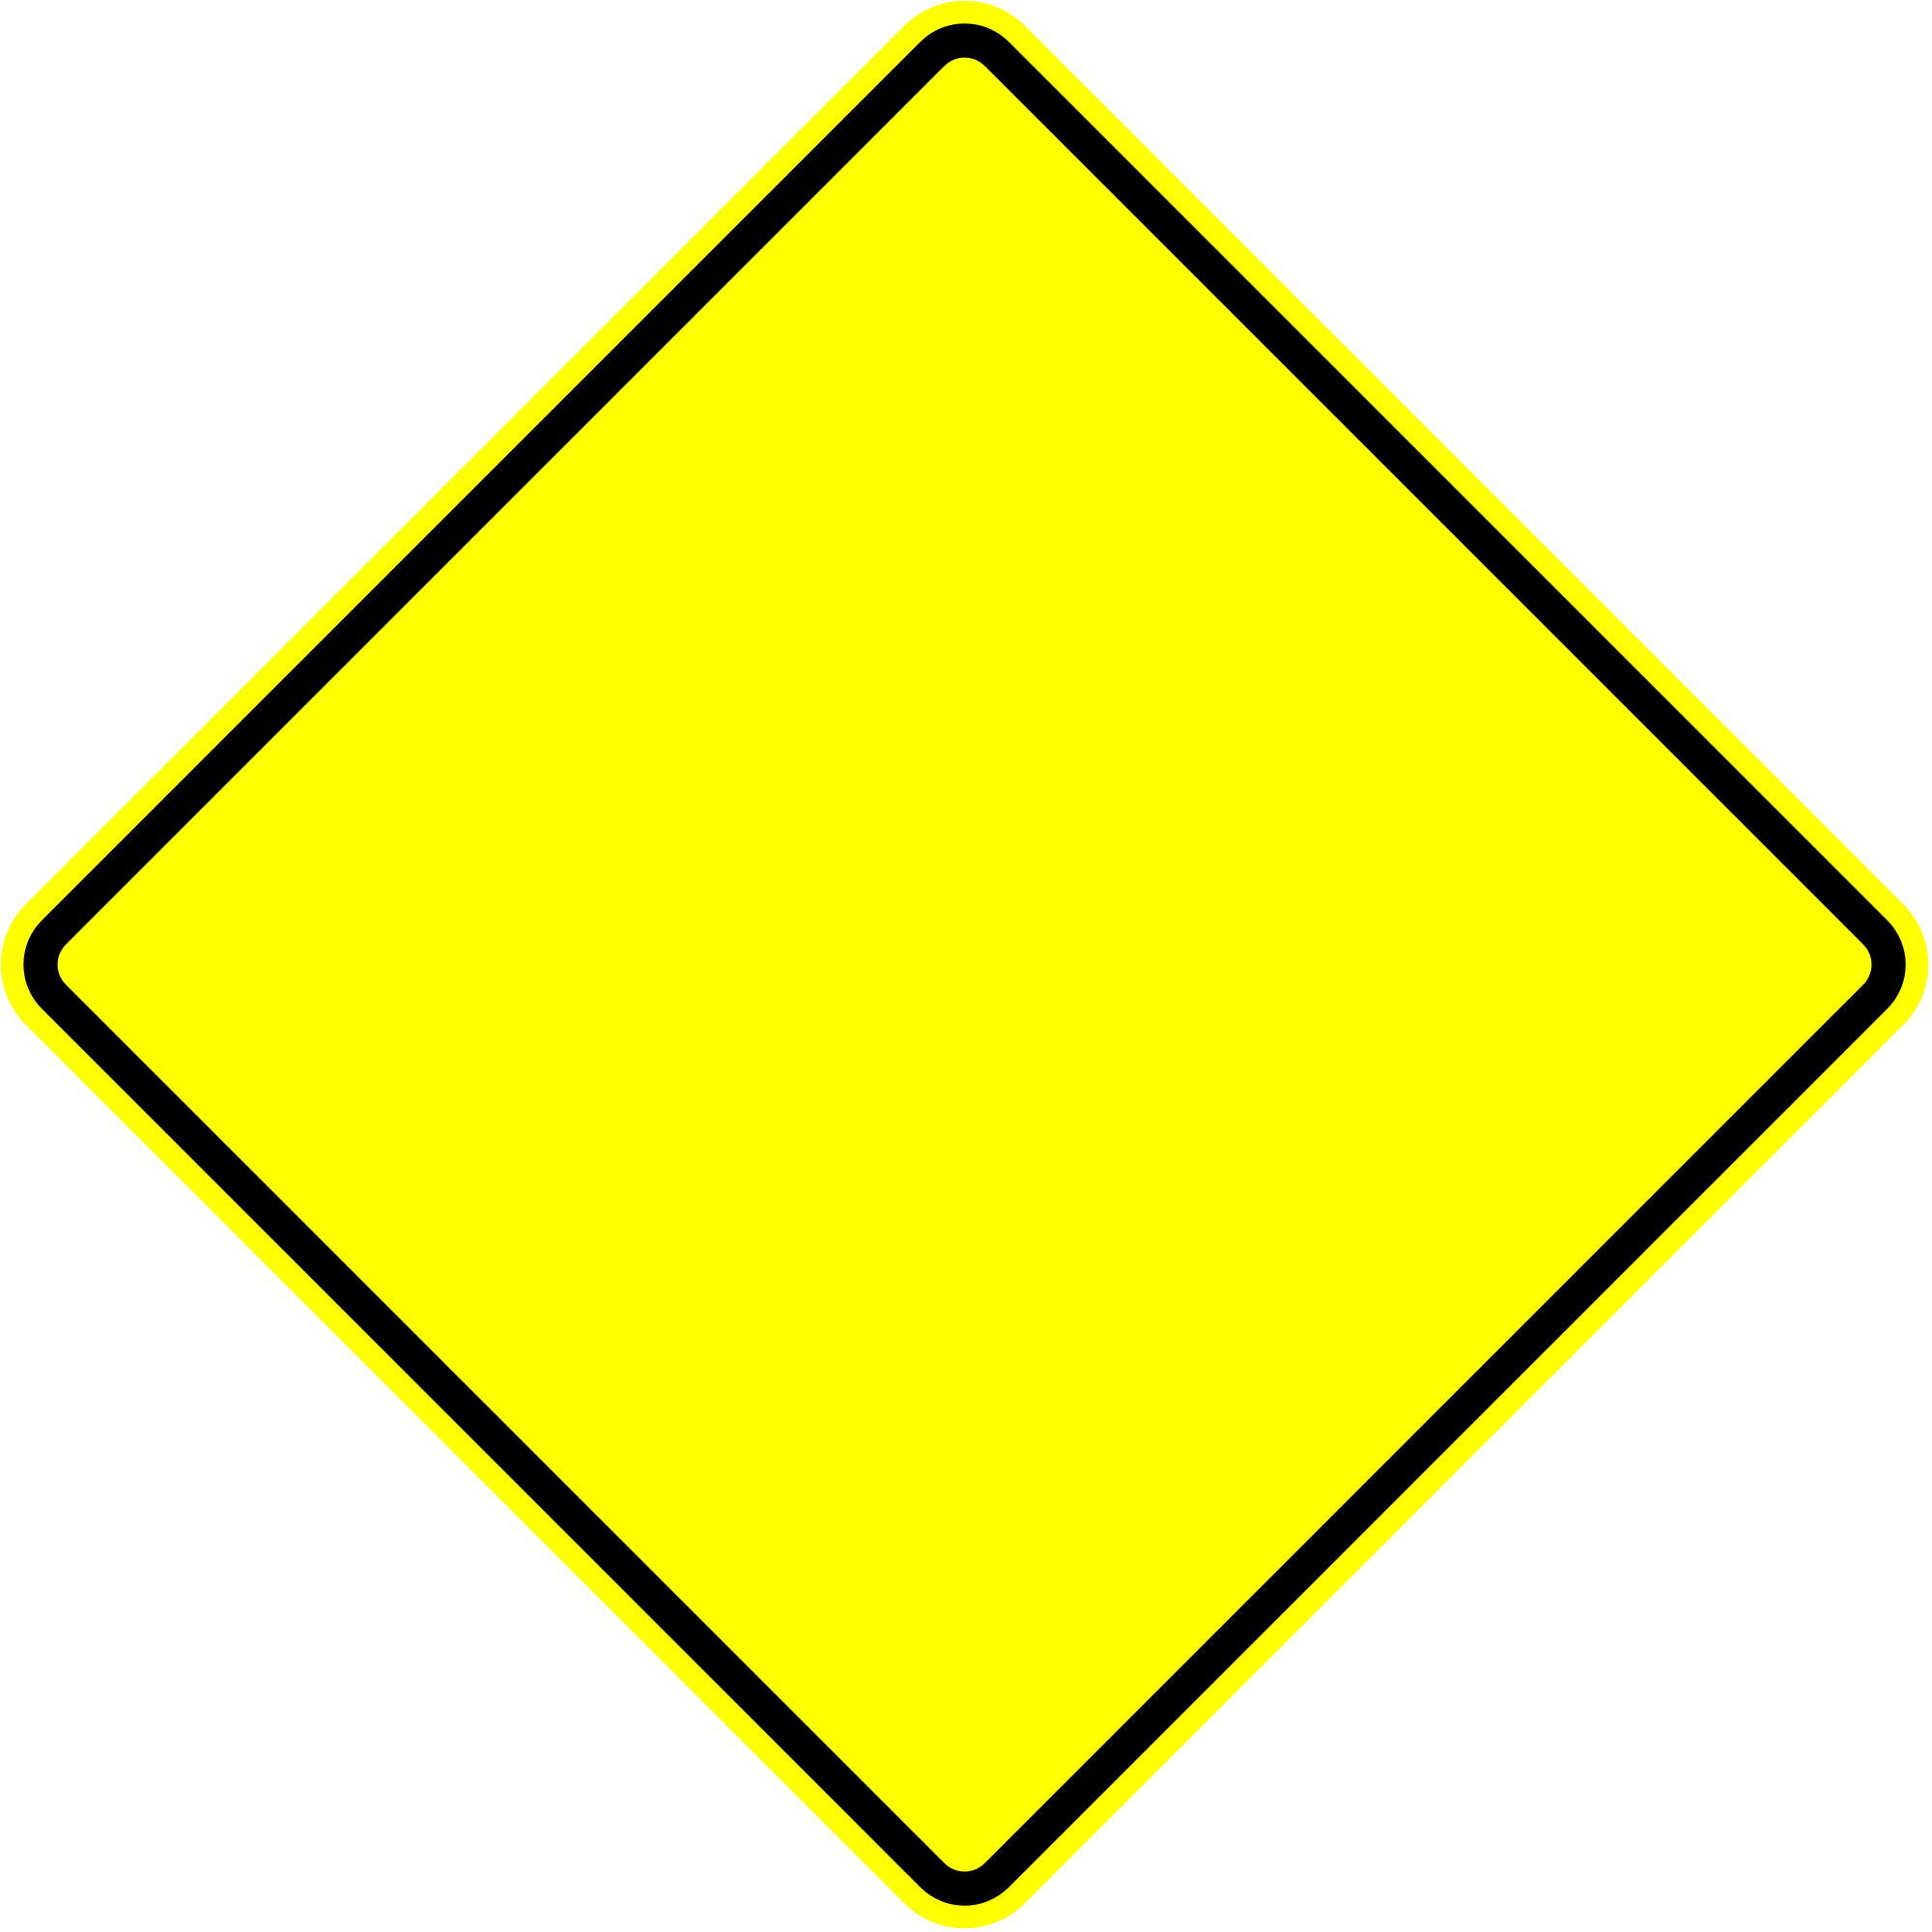 Warning Sign Transparent Pictures To Pin On Pinterest - Blank Yellow Diamond Road Sign (2000x2000)